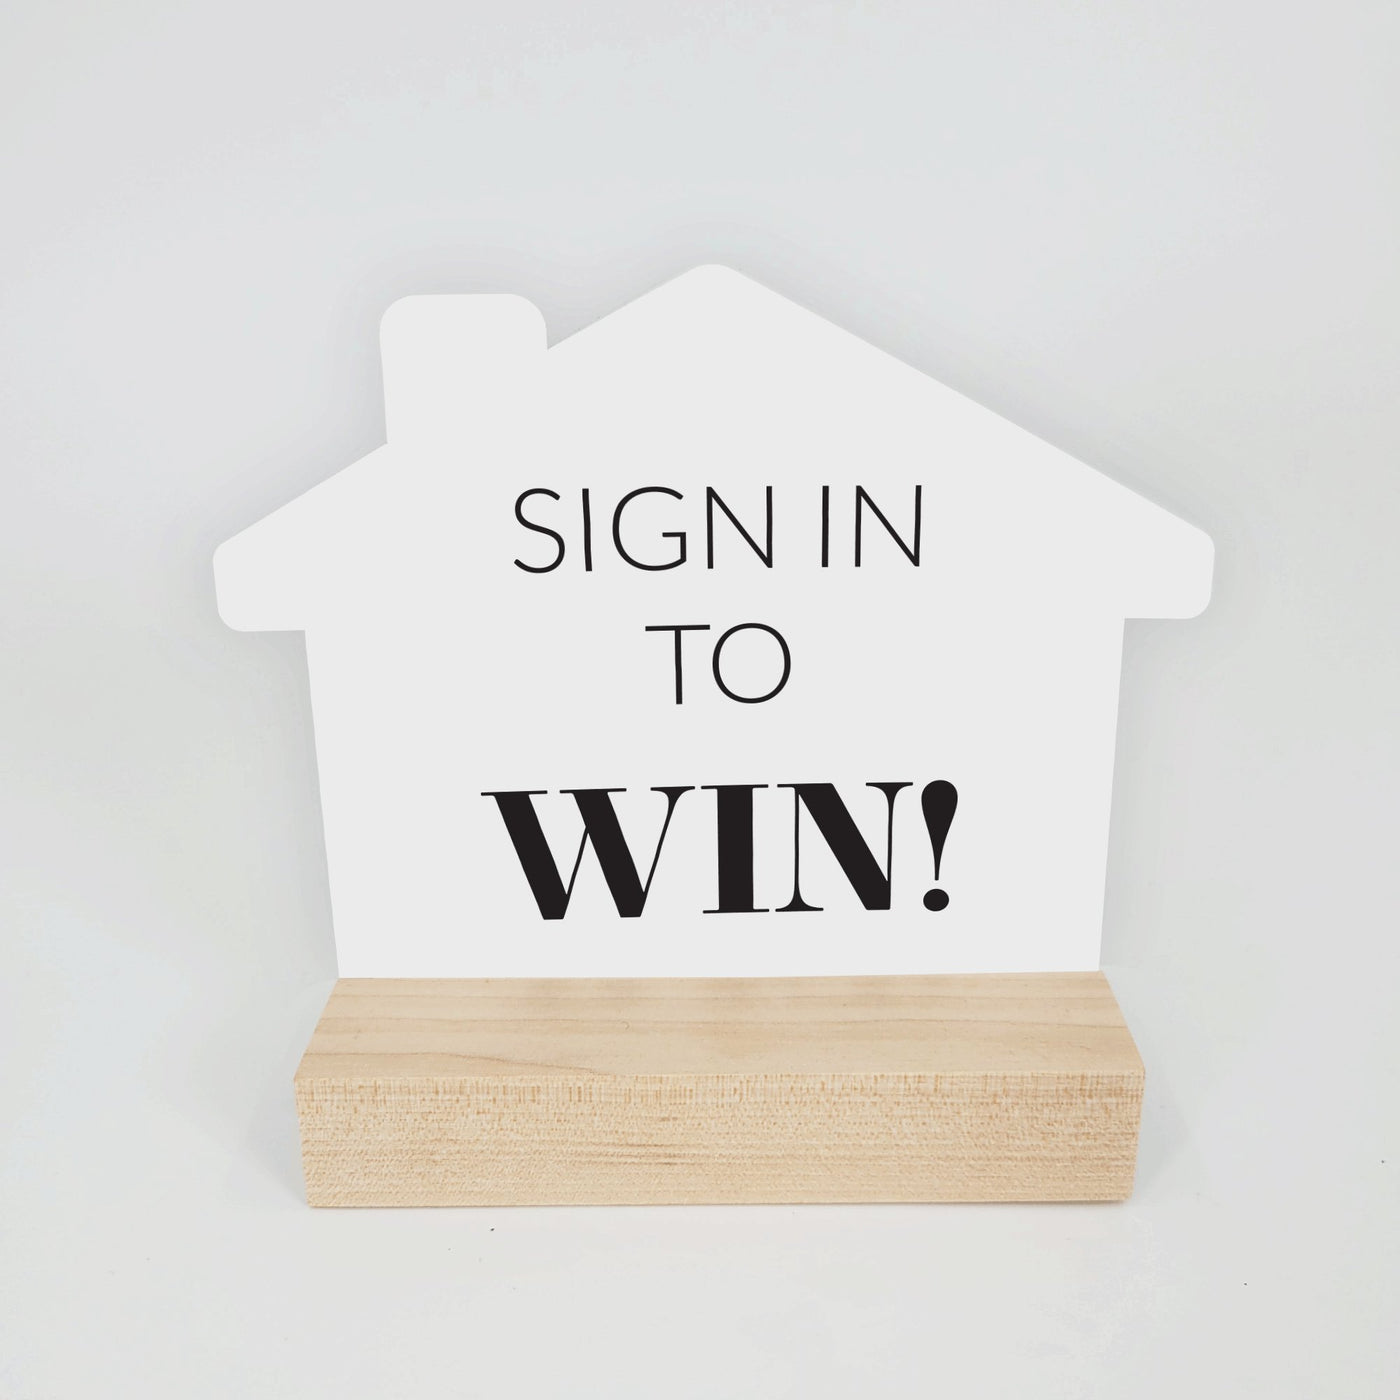 4x4 House - Sign In to WIN! - All Things Real Estate